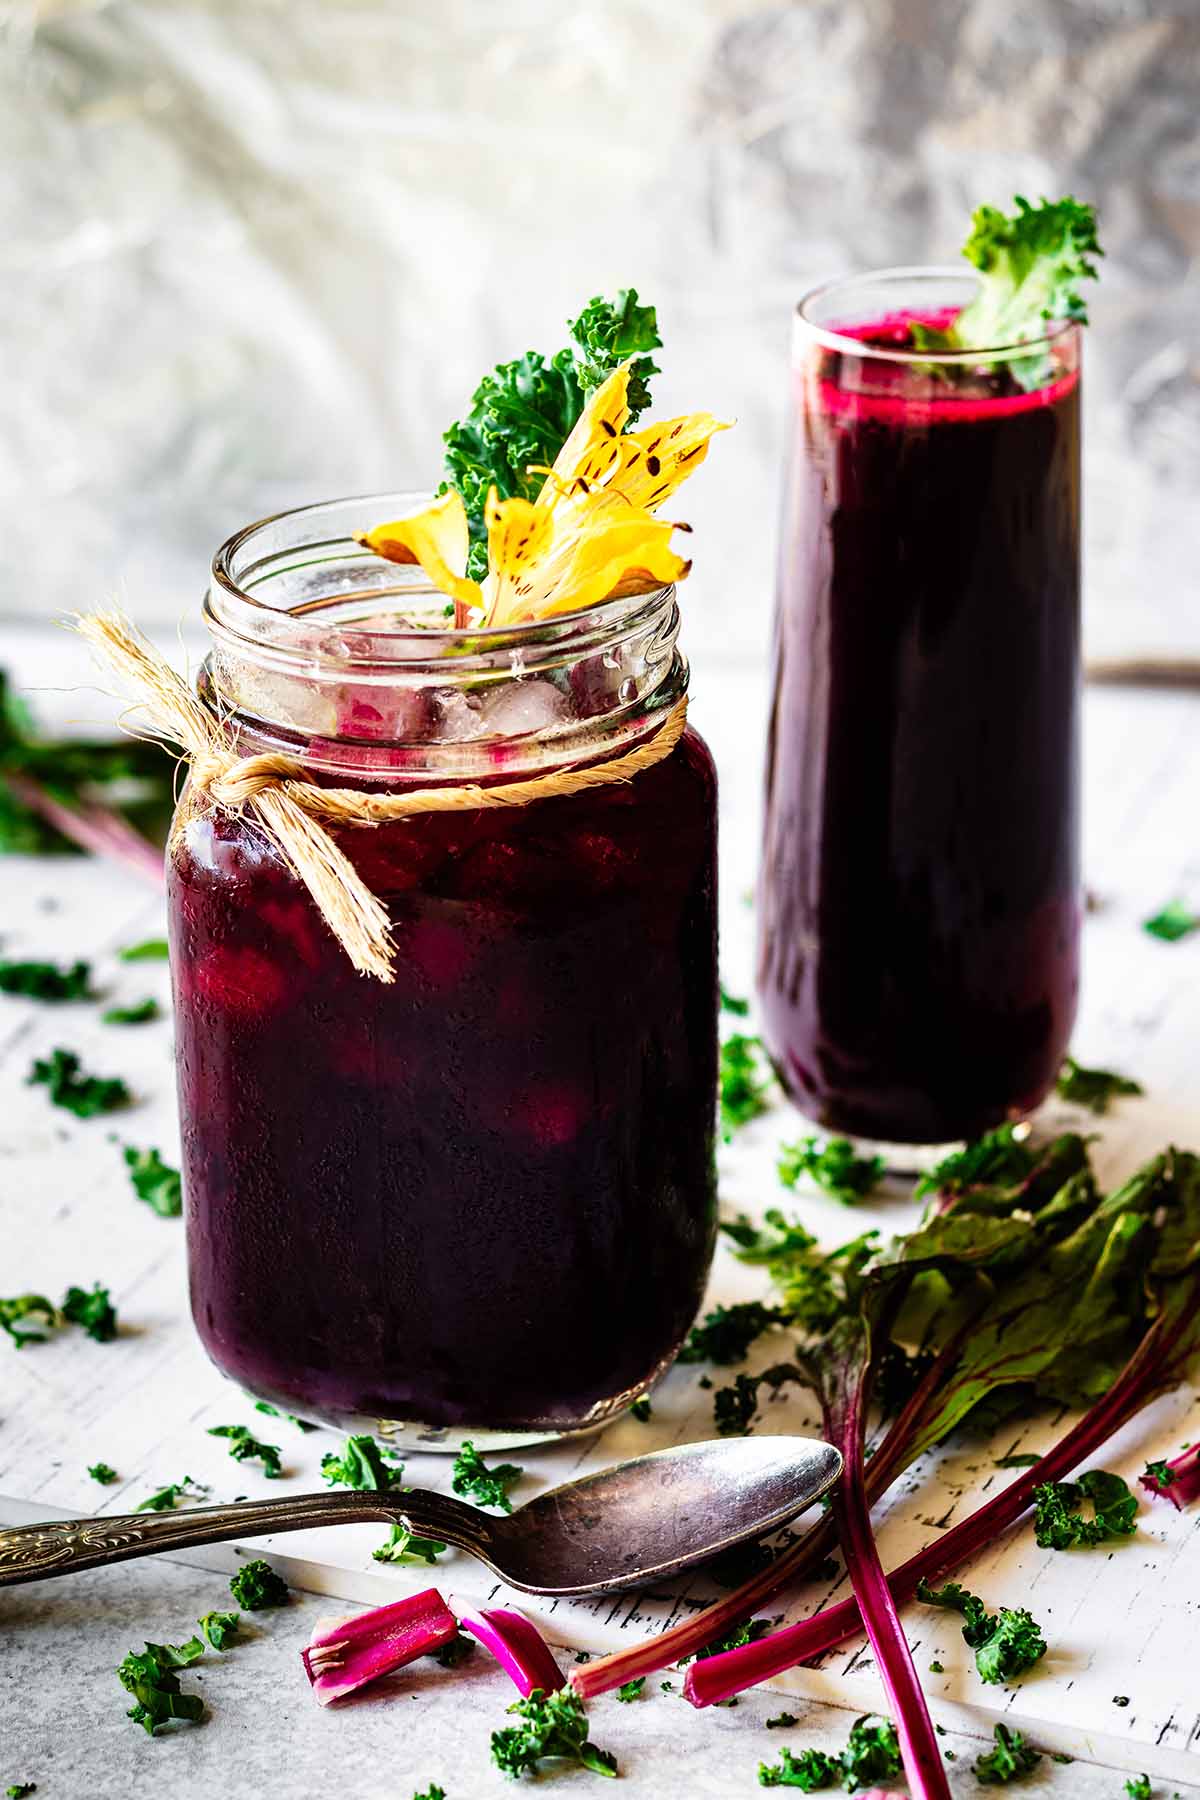 A glass mug and tall glass filled with beet green juice garnished with kale.